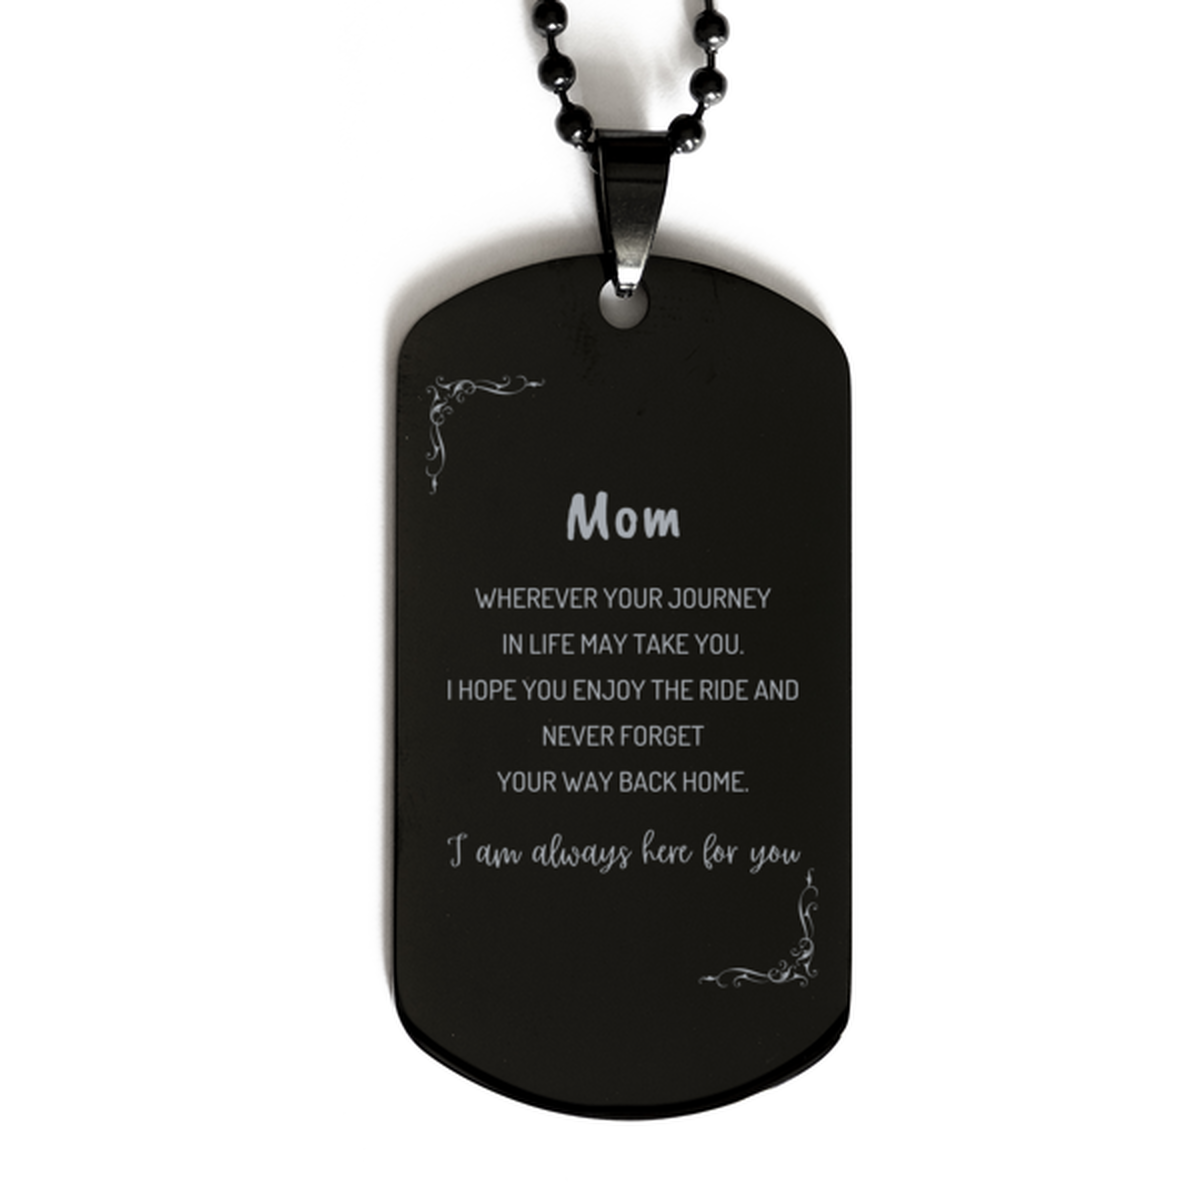 Mom wherever your journey in life may take you, I am always here for you Mom Black Dog Tag, Awesome Christmas Gifts For Mom, Mom Birthday Gifts for Men Women Family Loved One